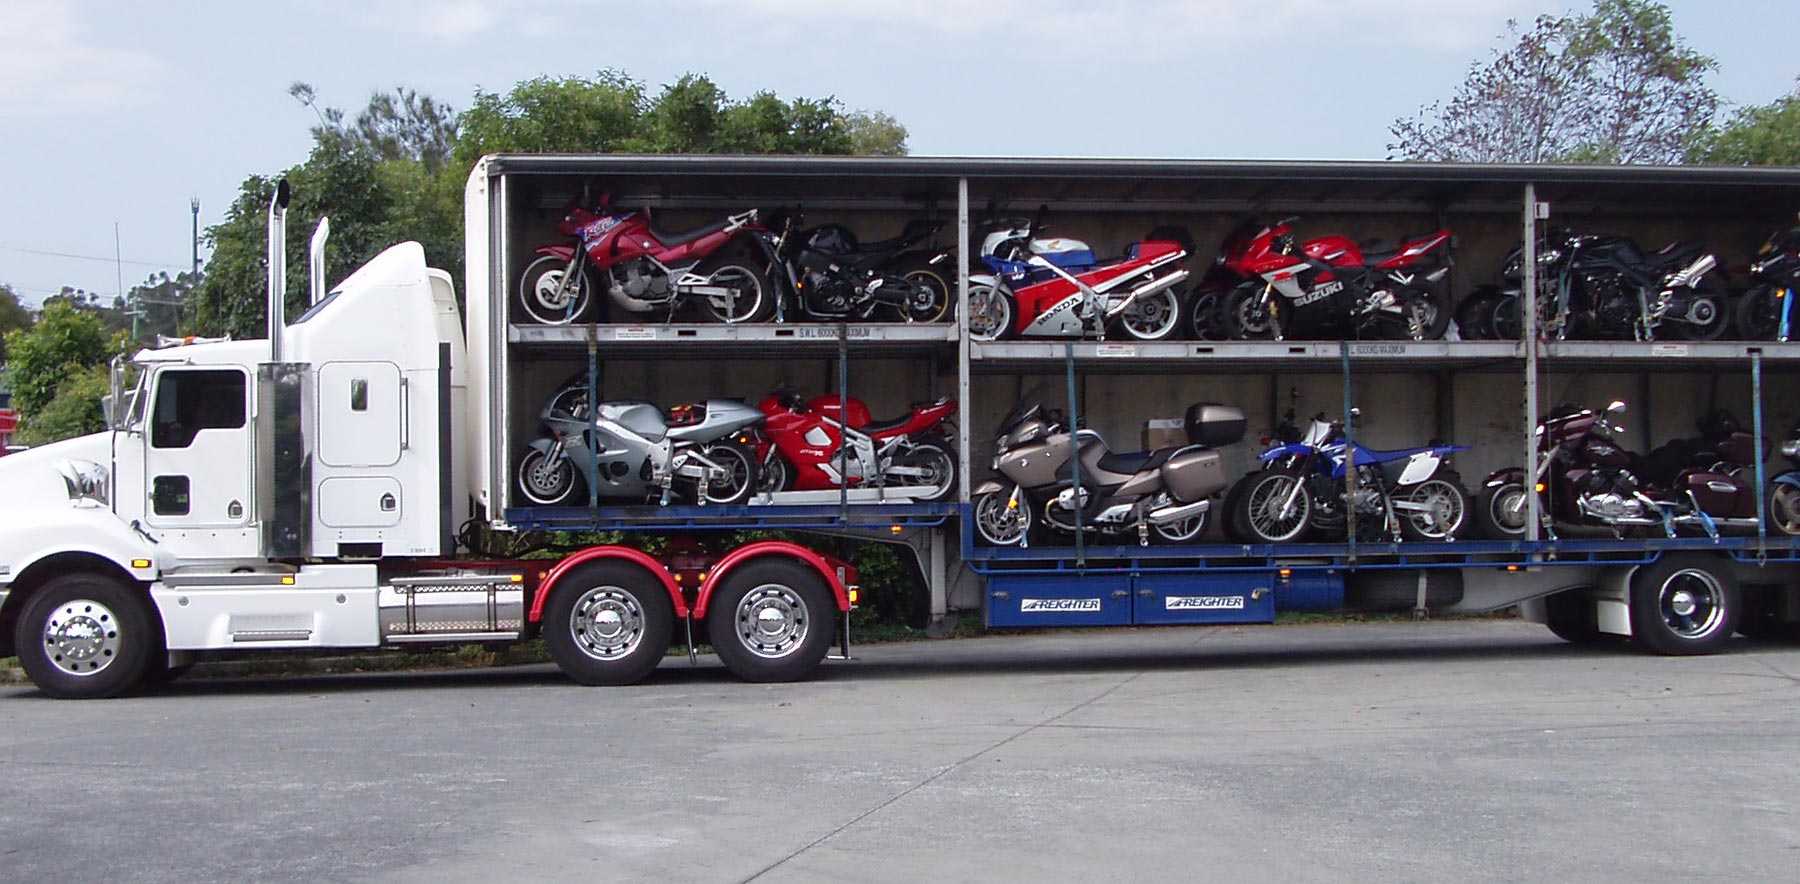 TRANSPORTING YOUR MOTORCYCLE